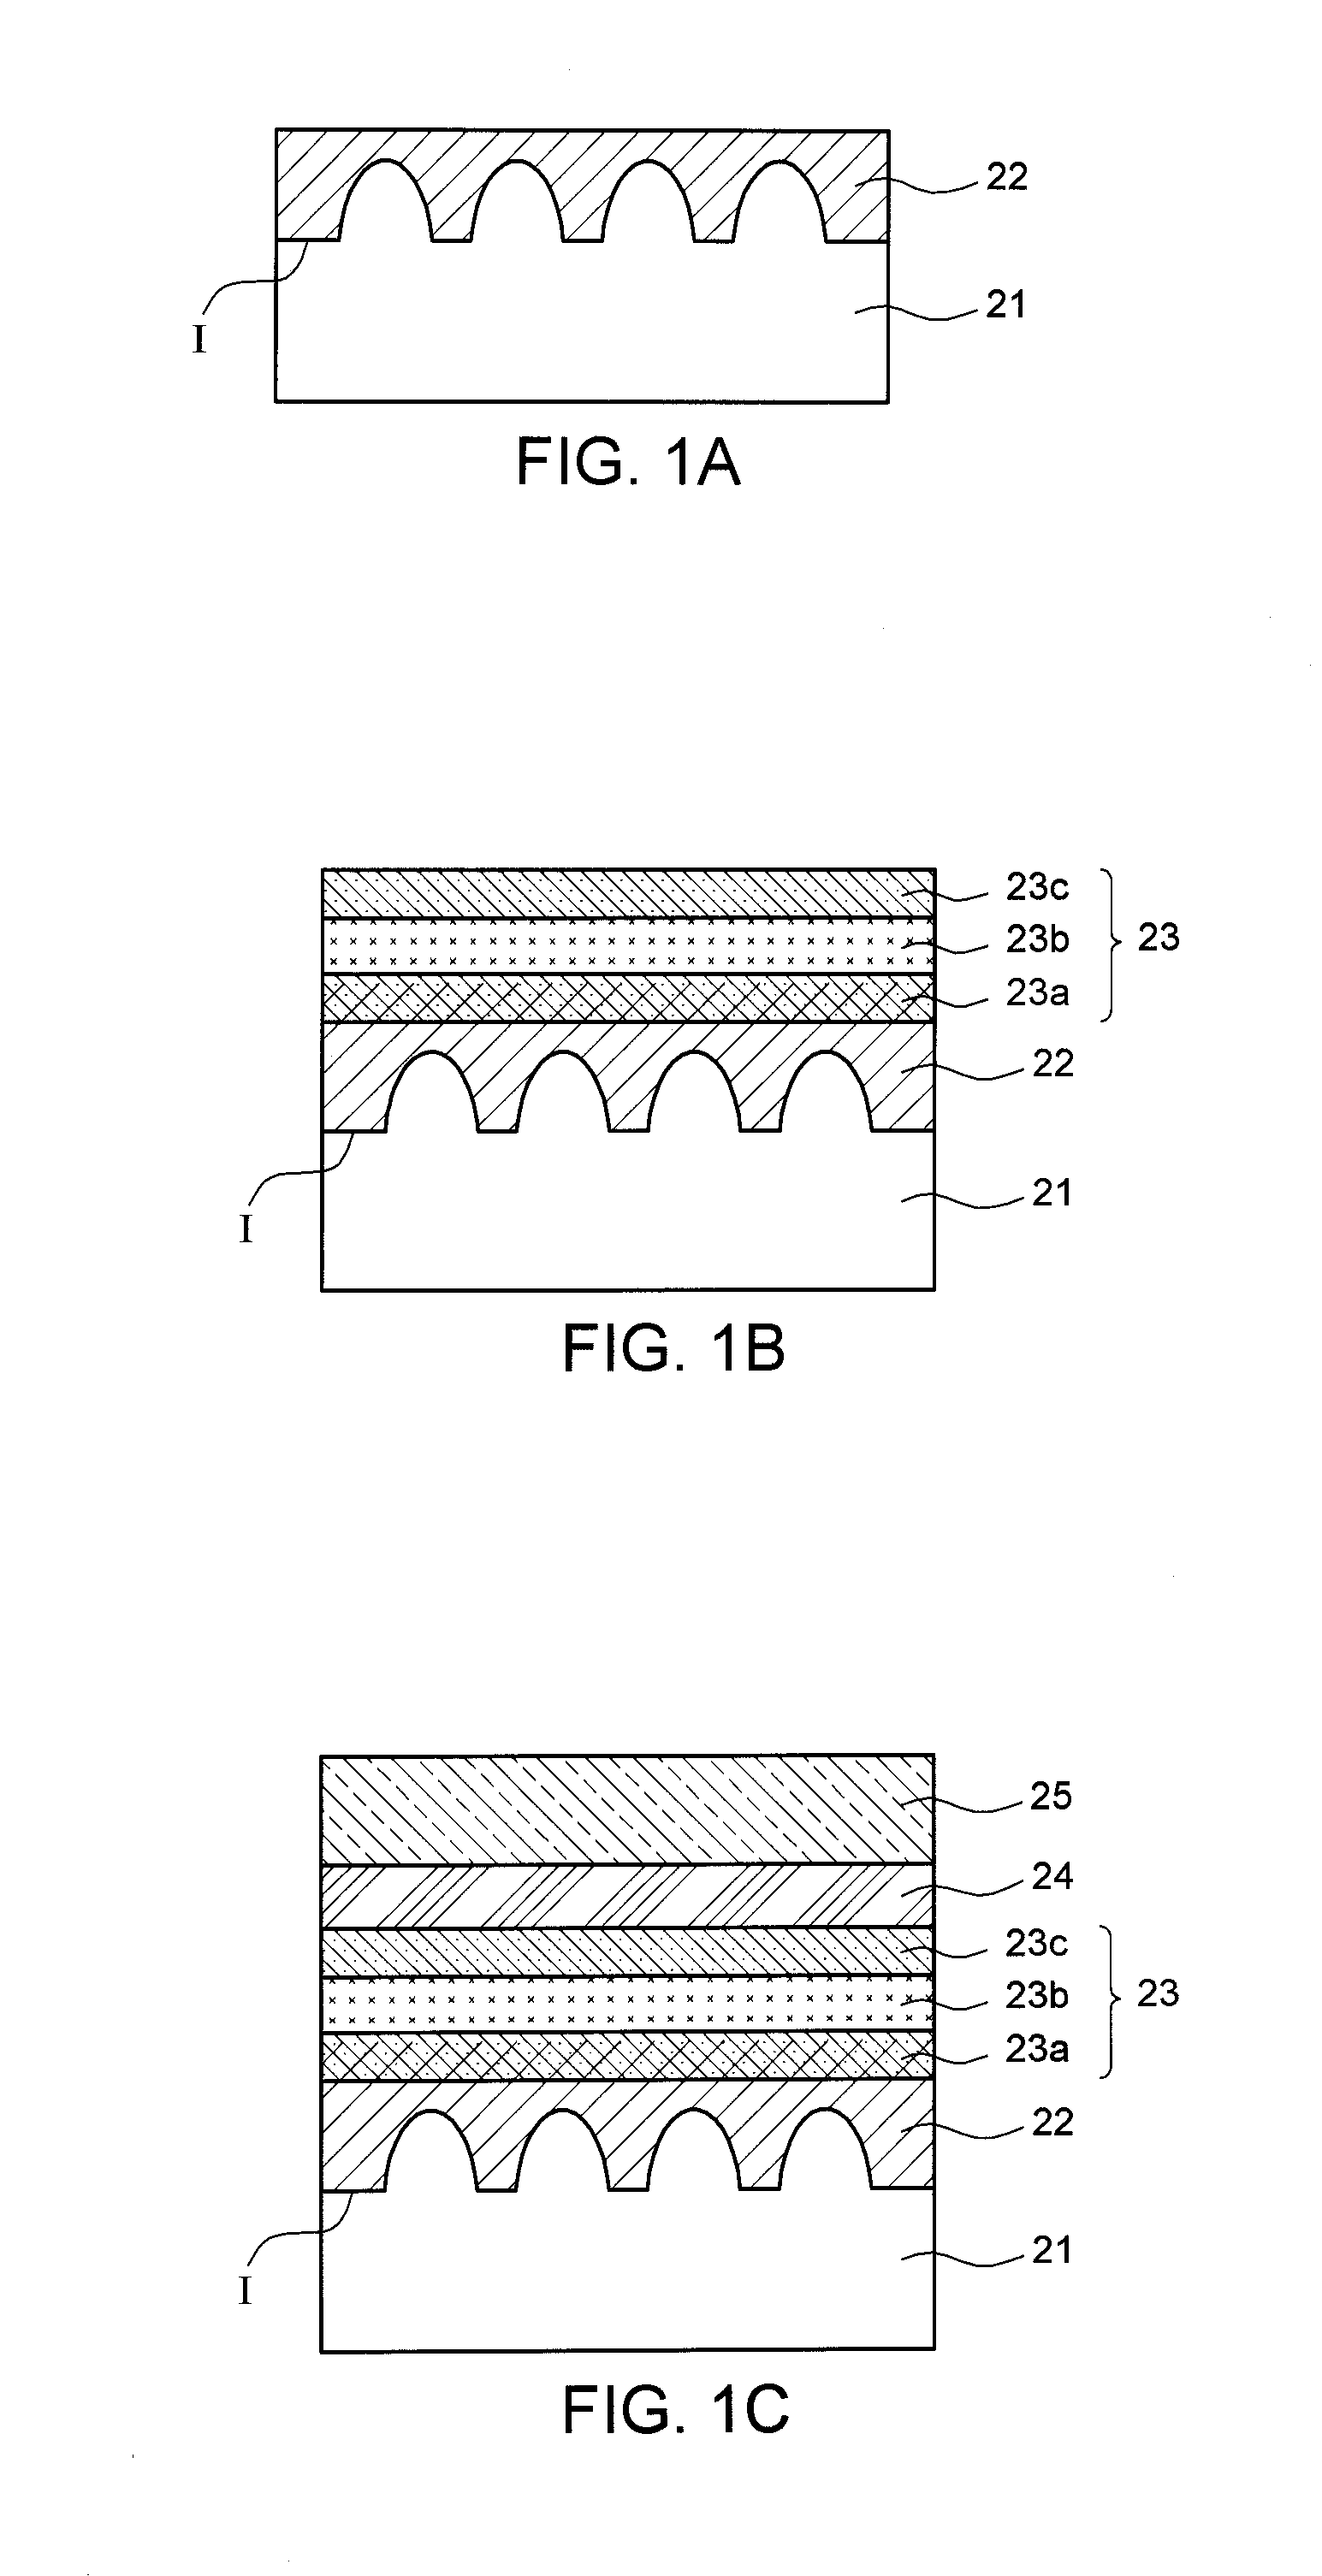 Method for Fabricating a Vertical Light-Emitting Diode with High Brightness